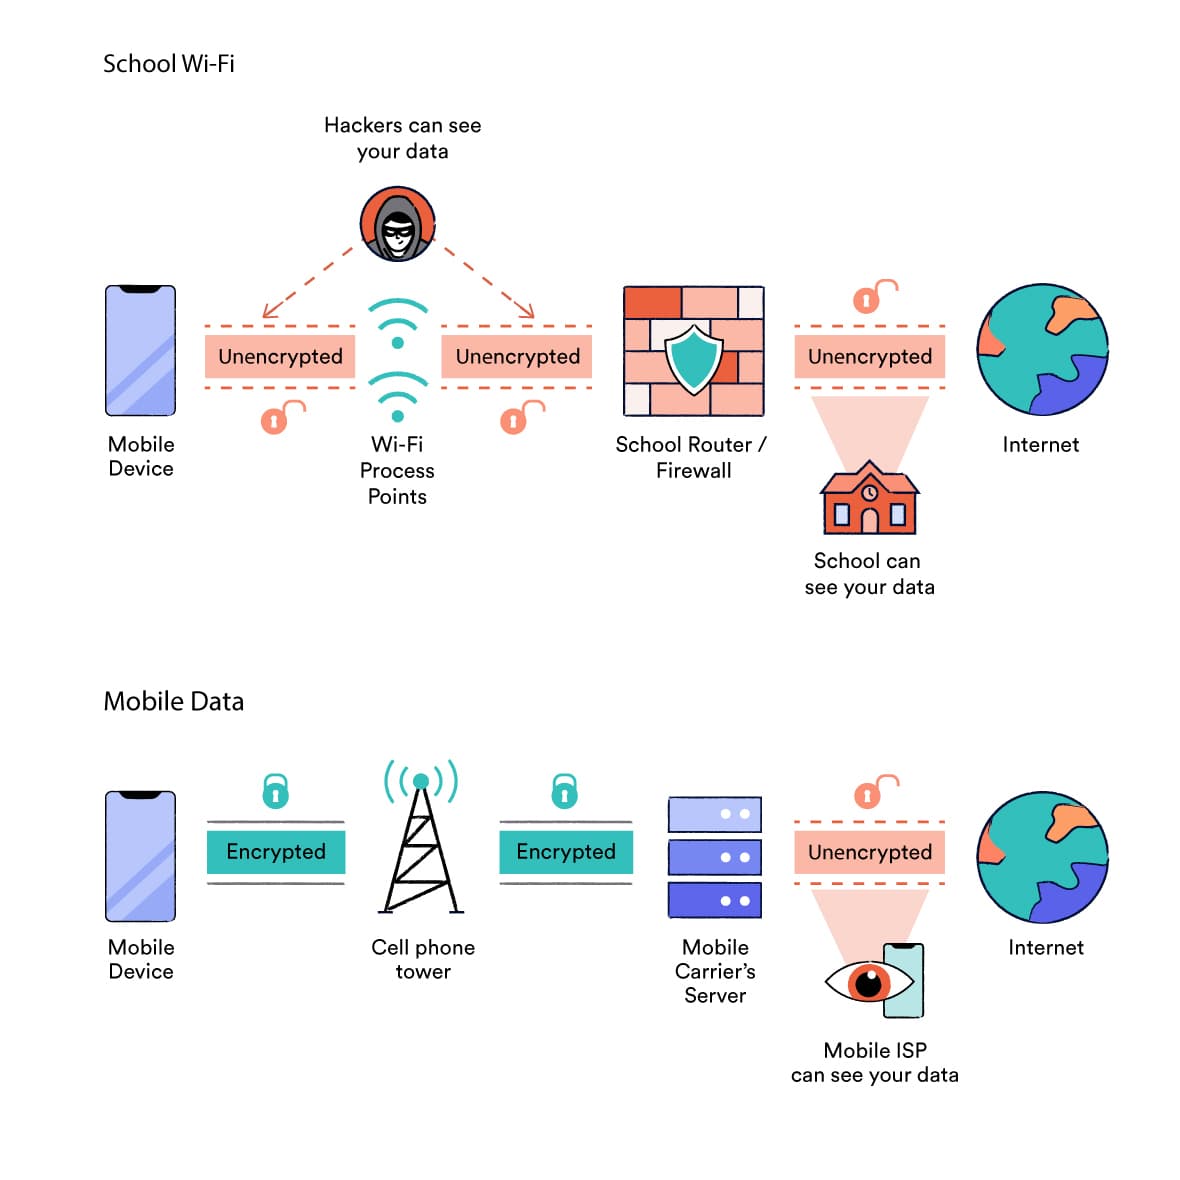 How school WiFi and mobile data internet connections work